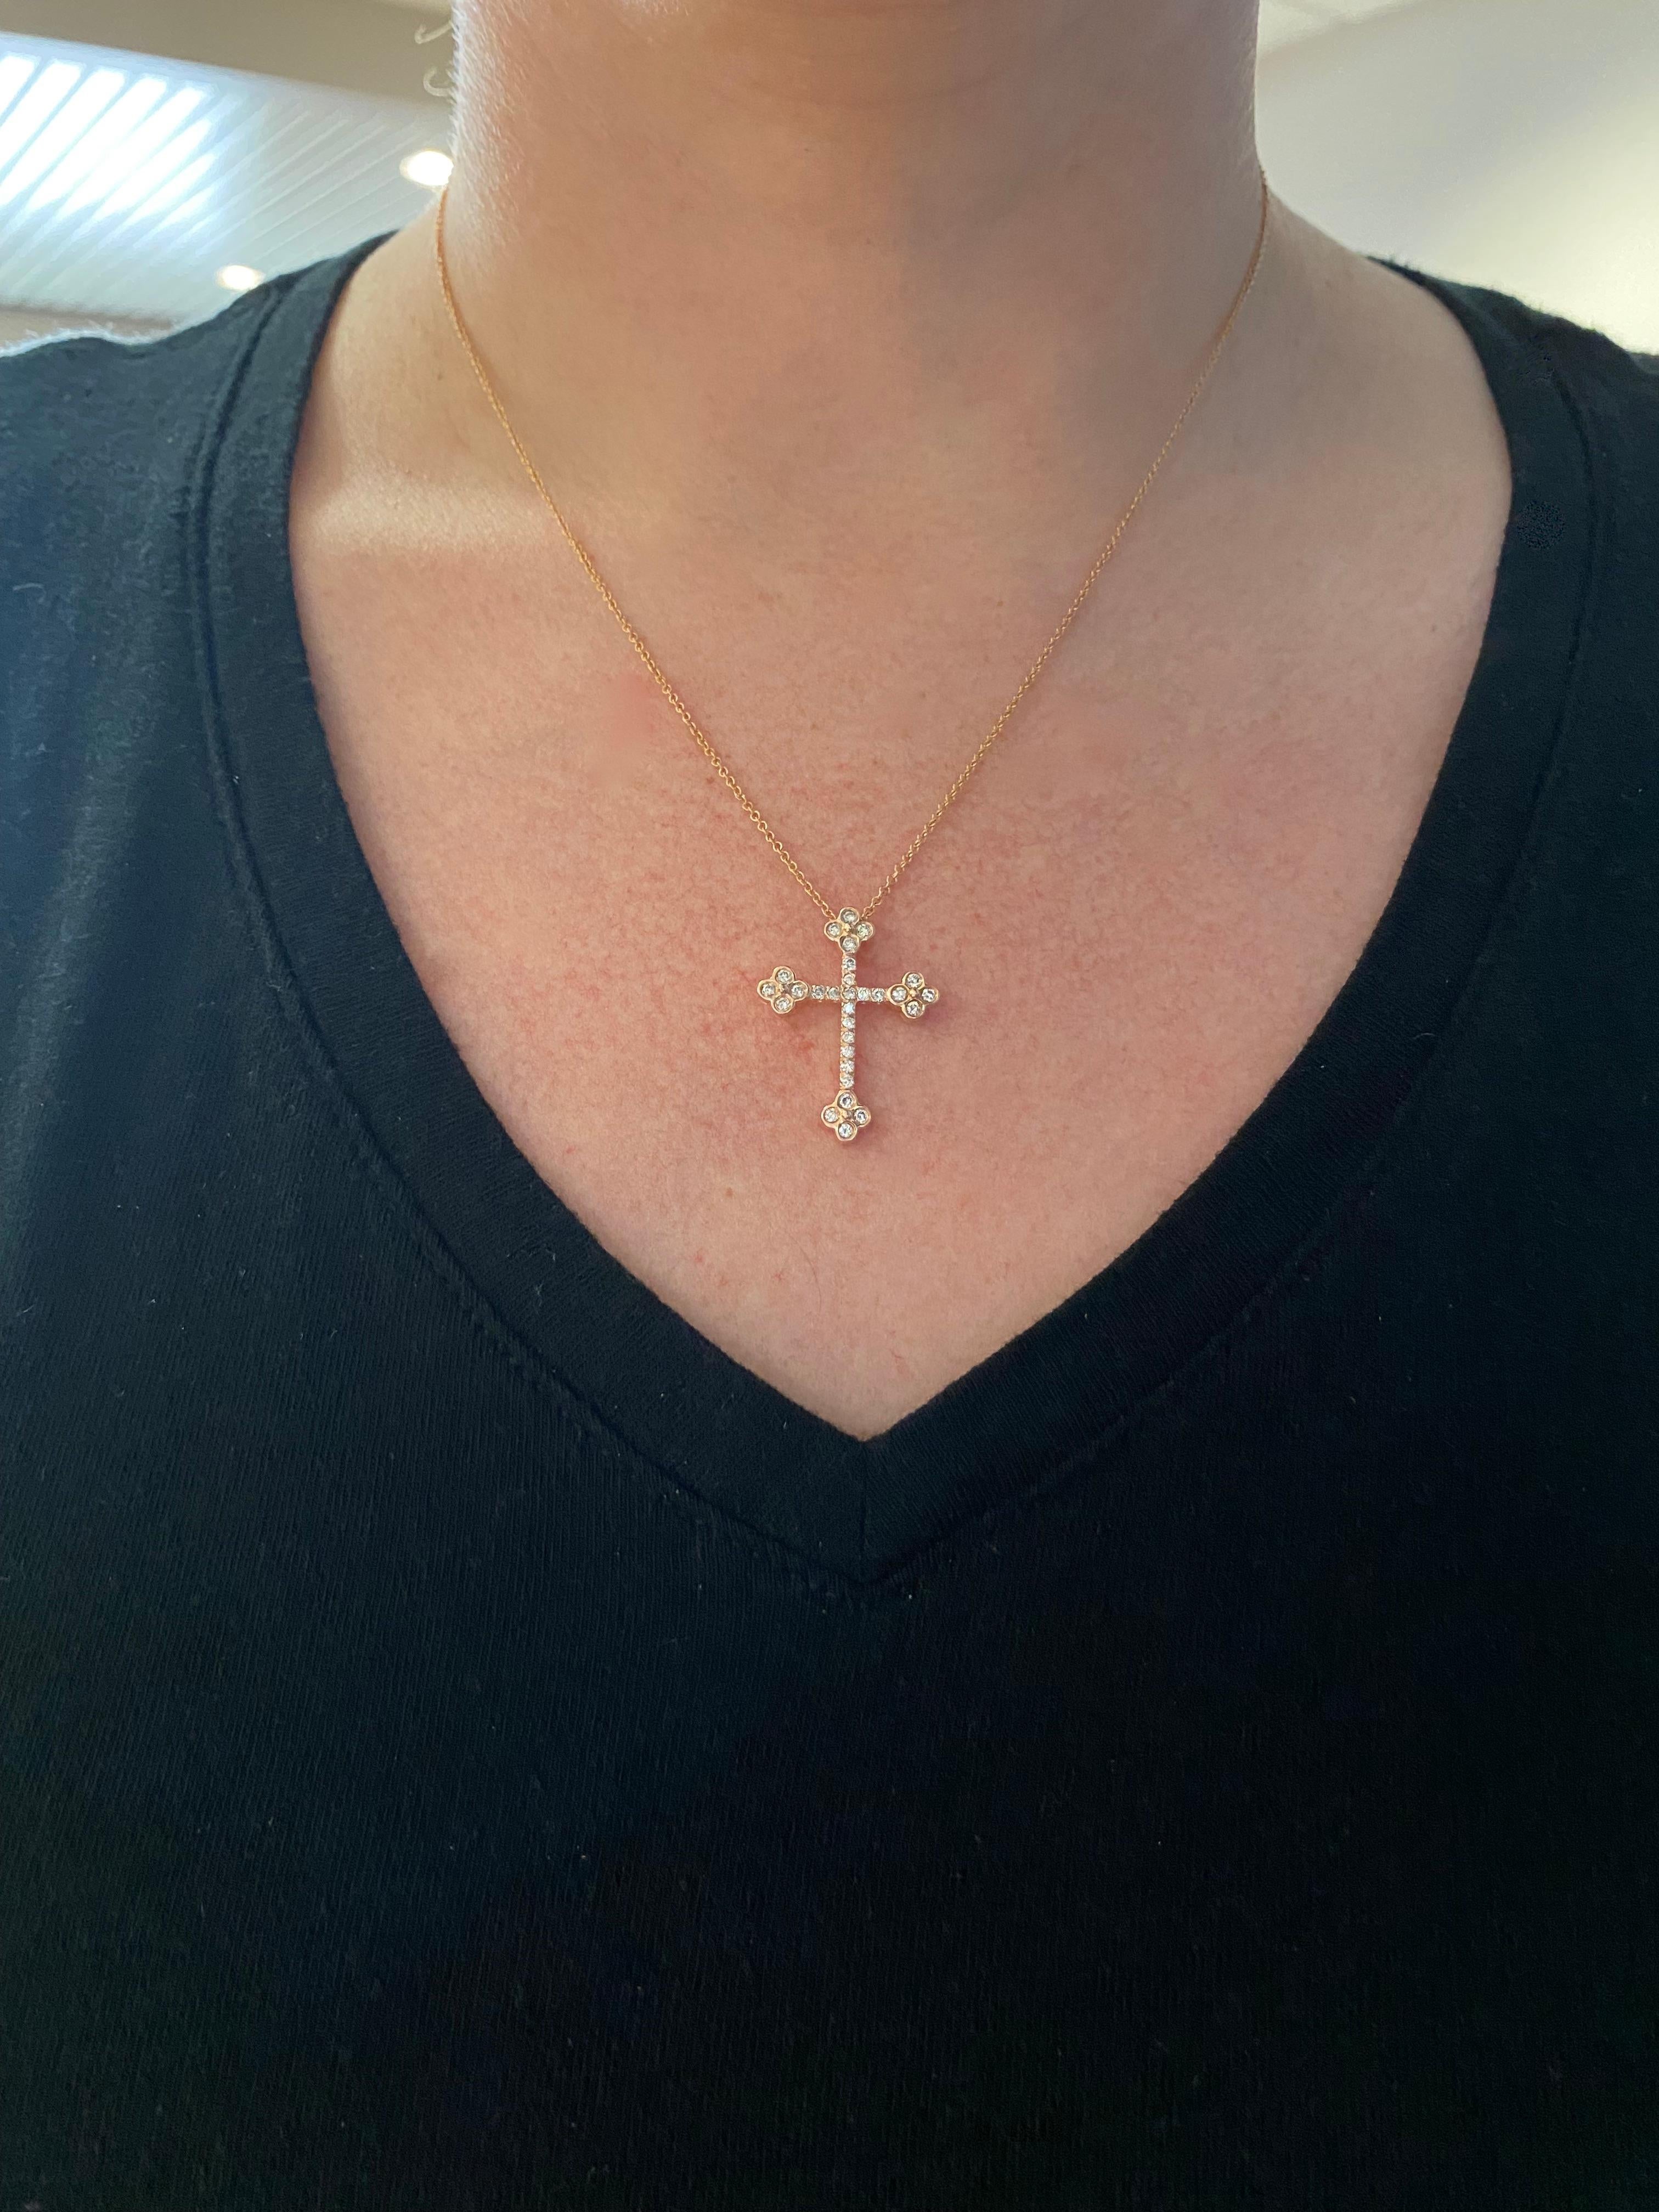 Women's Diamond Cross Crafted in 14k Rose Gold